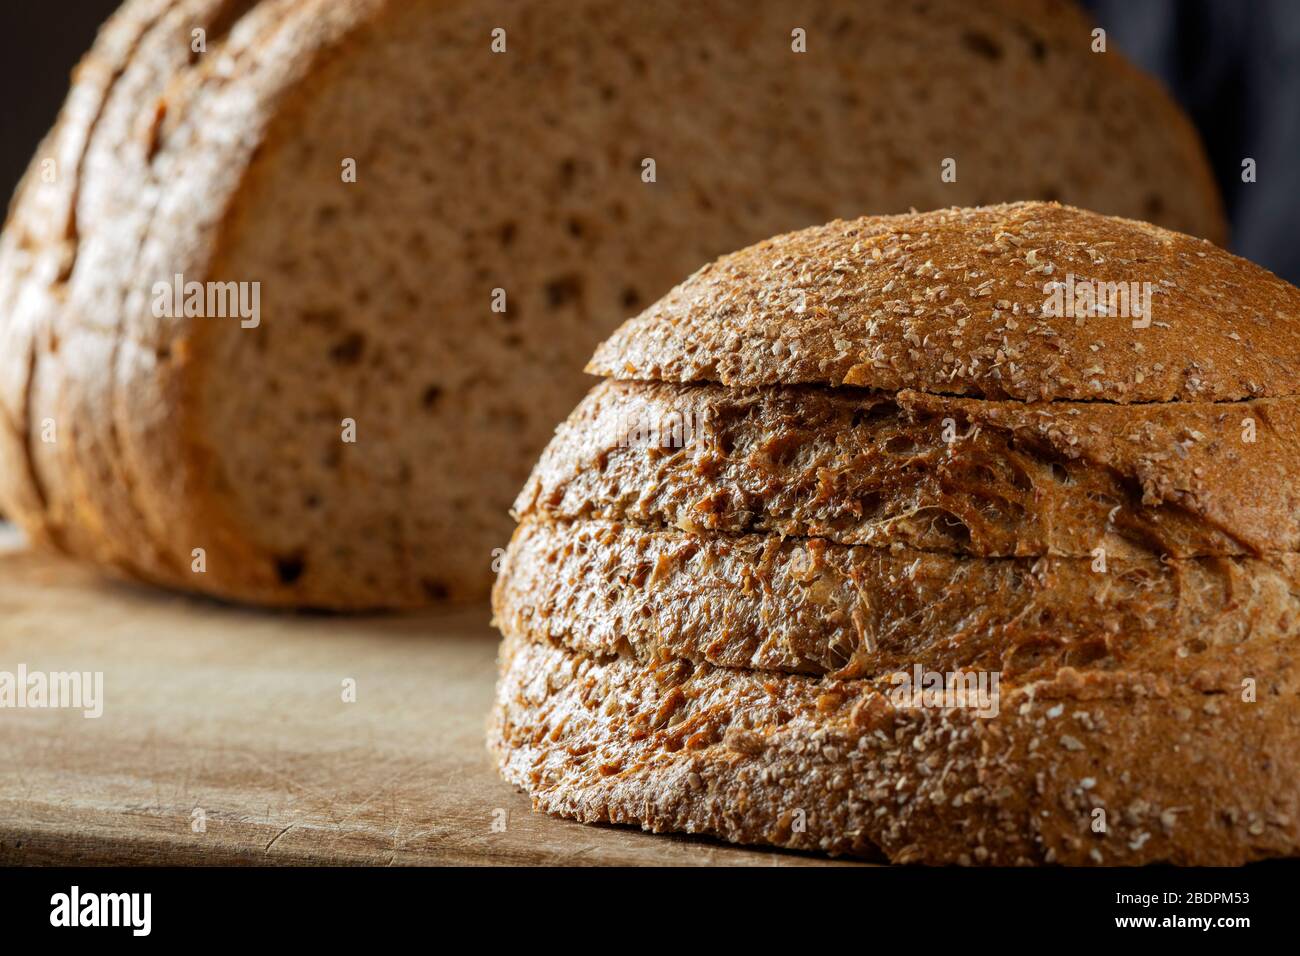 Slices of borwn bread on a wooden cutting board Stock Photo